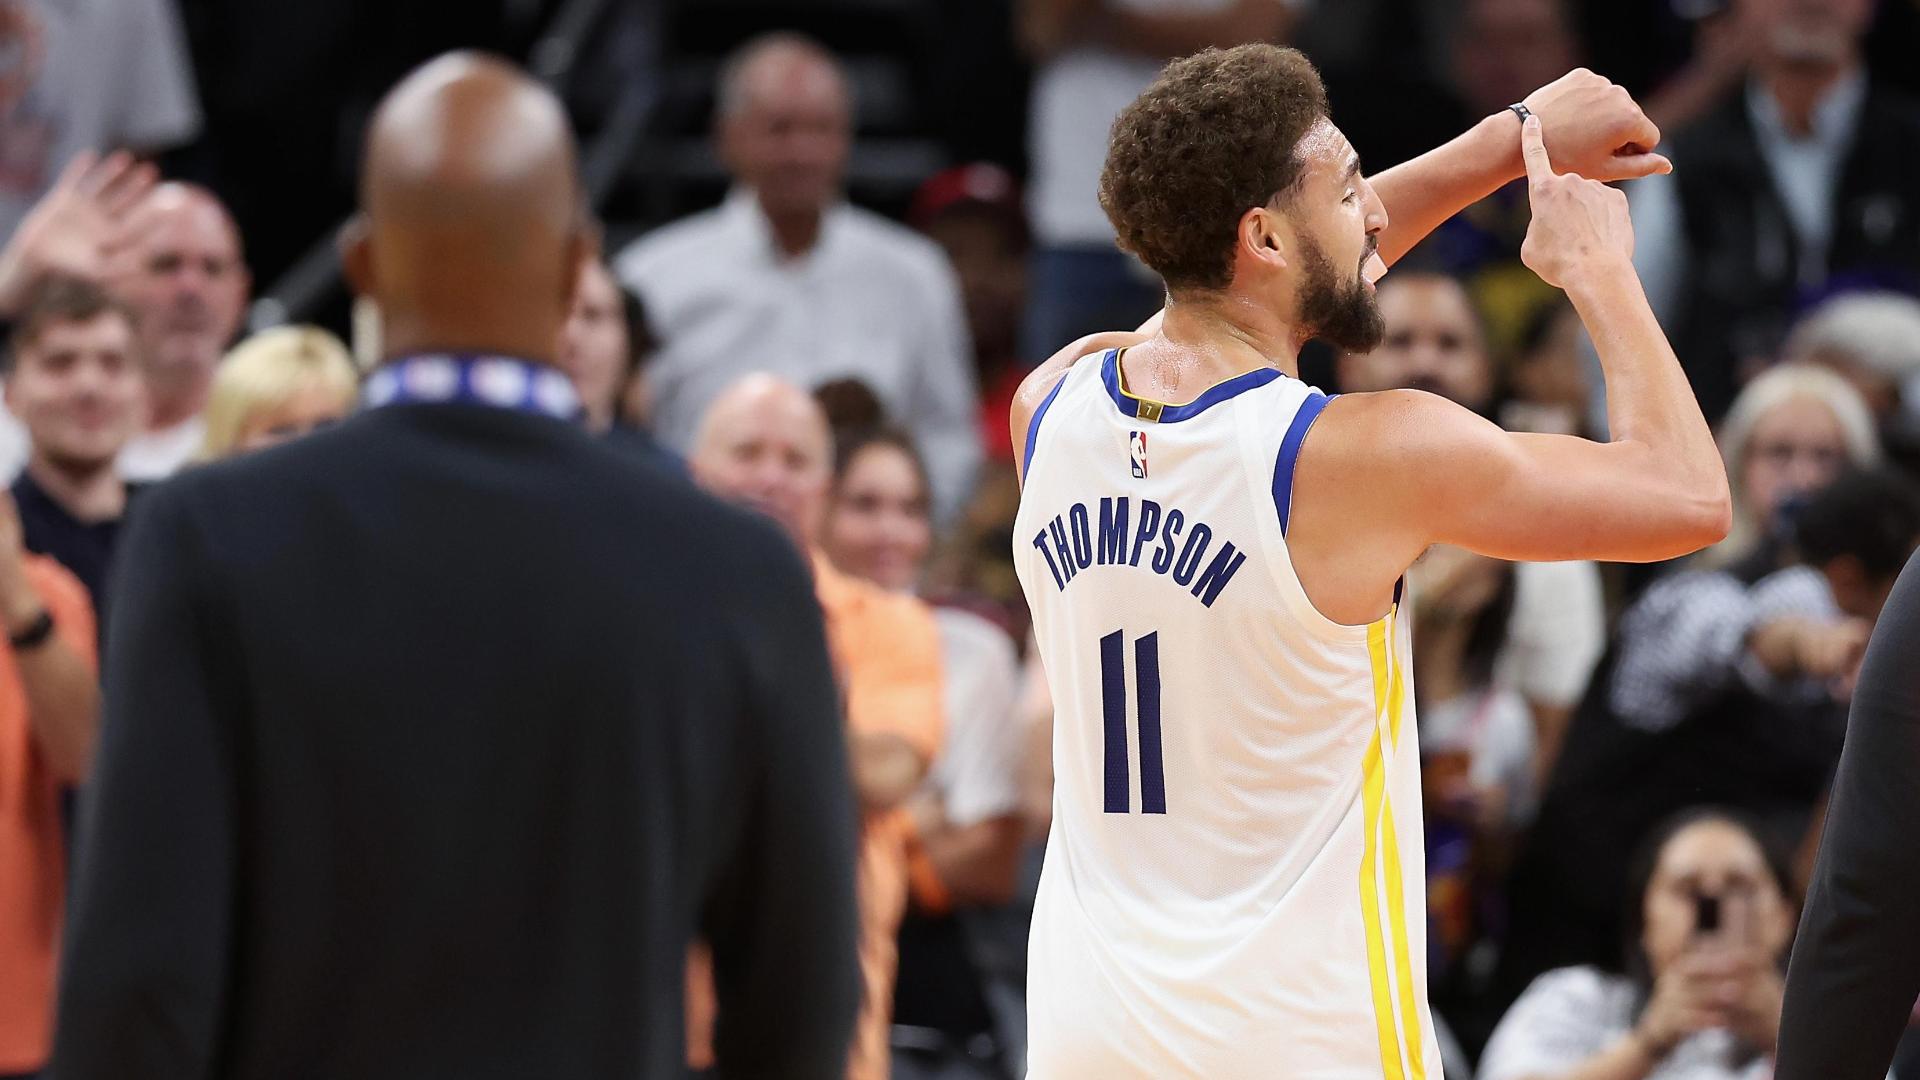 Lakers-Warriors - Klay Thompson thinks his dad will root against him - ESPN